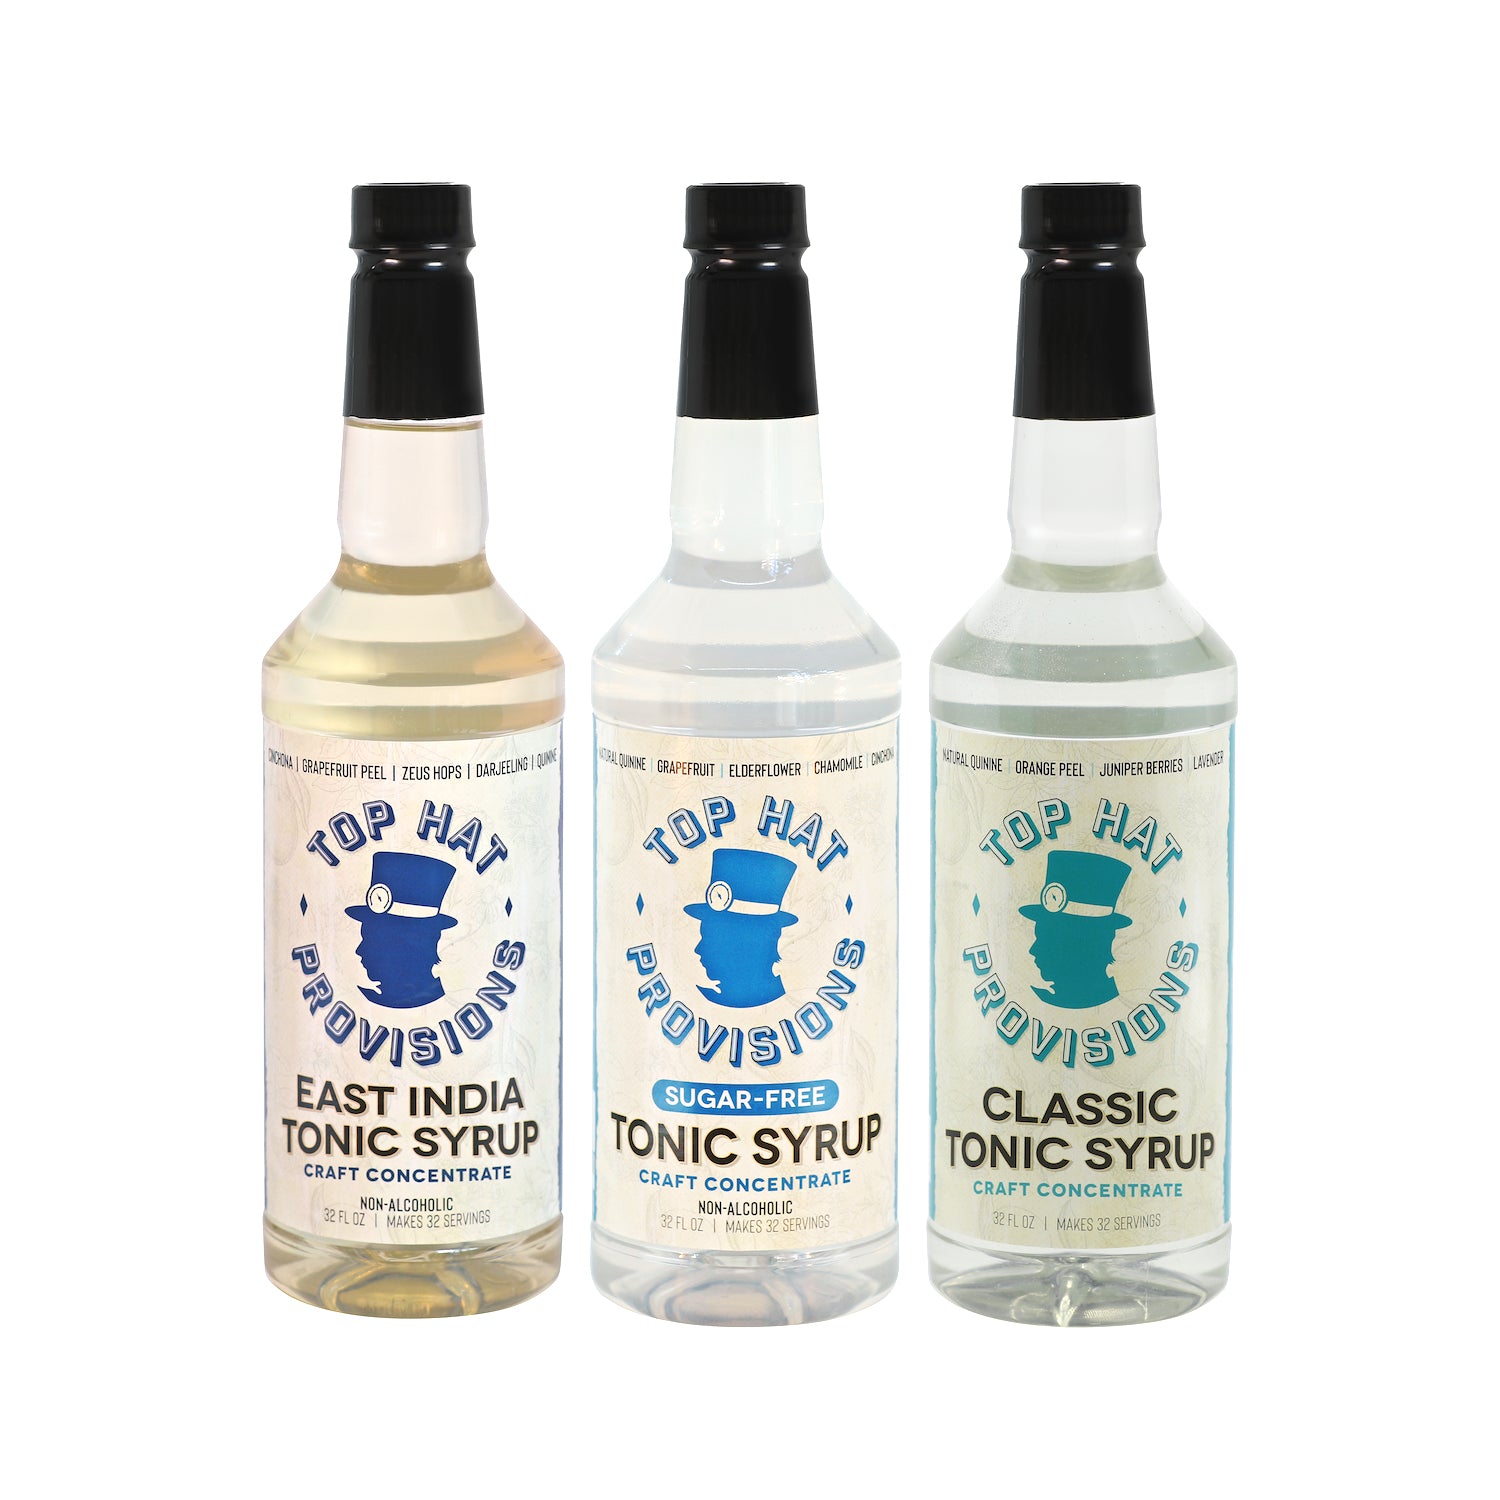 Top Hat Tonic Syrup Trio & 5x Quinine Concentrate Combo Kit - East India Tonic Syrup, Sugar Free Elderflower Tonic Syrup & Classic Tonic Syrup - 3 pack of 32oz bottles